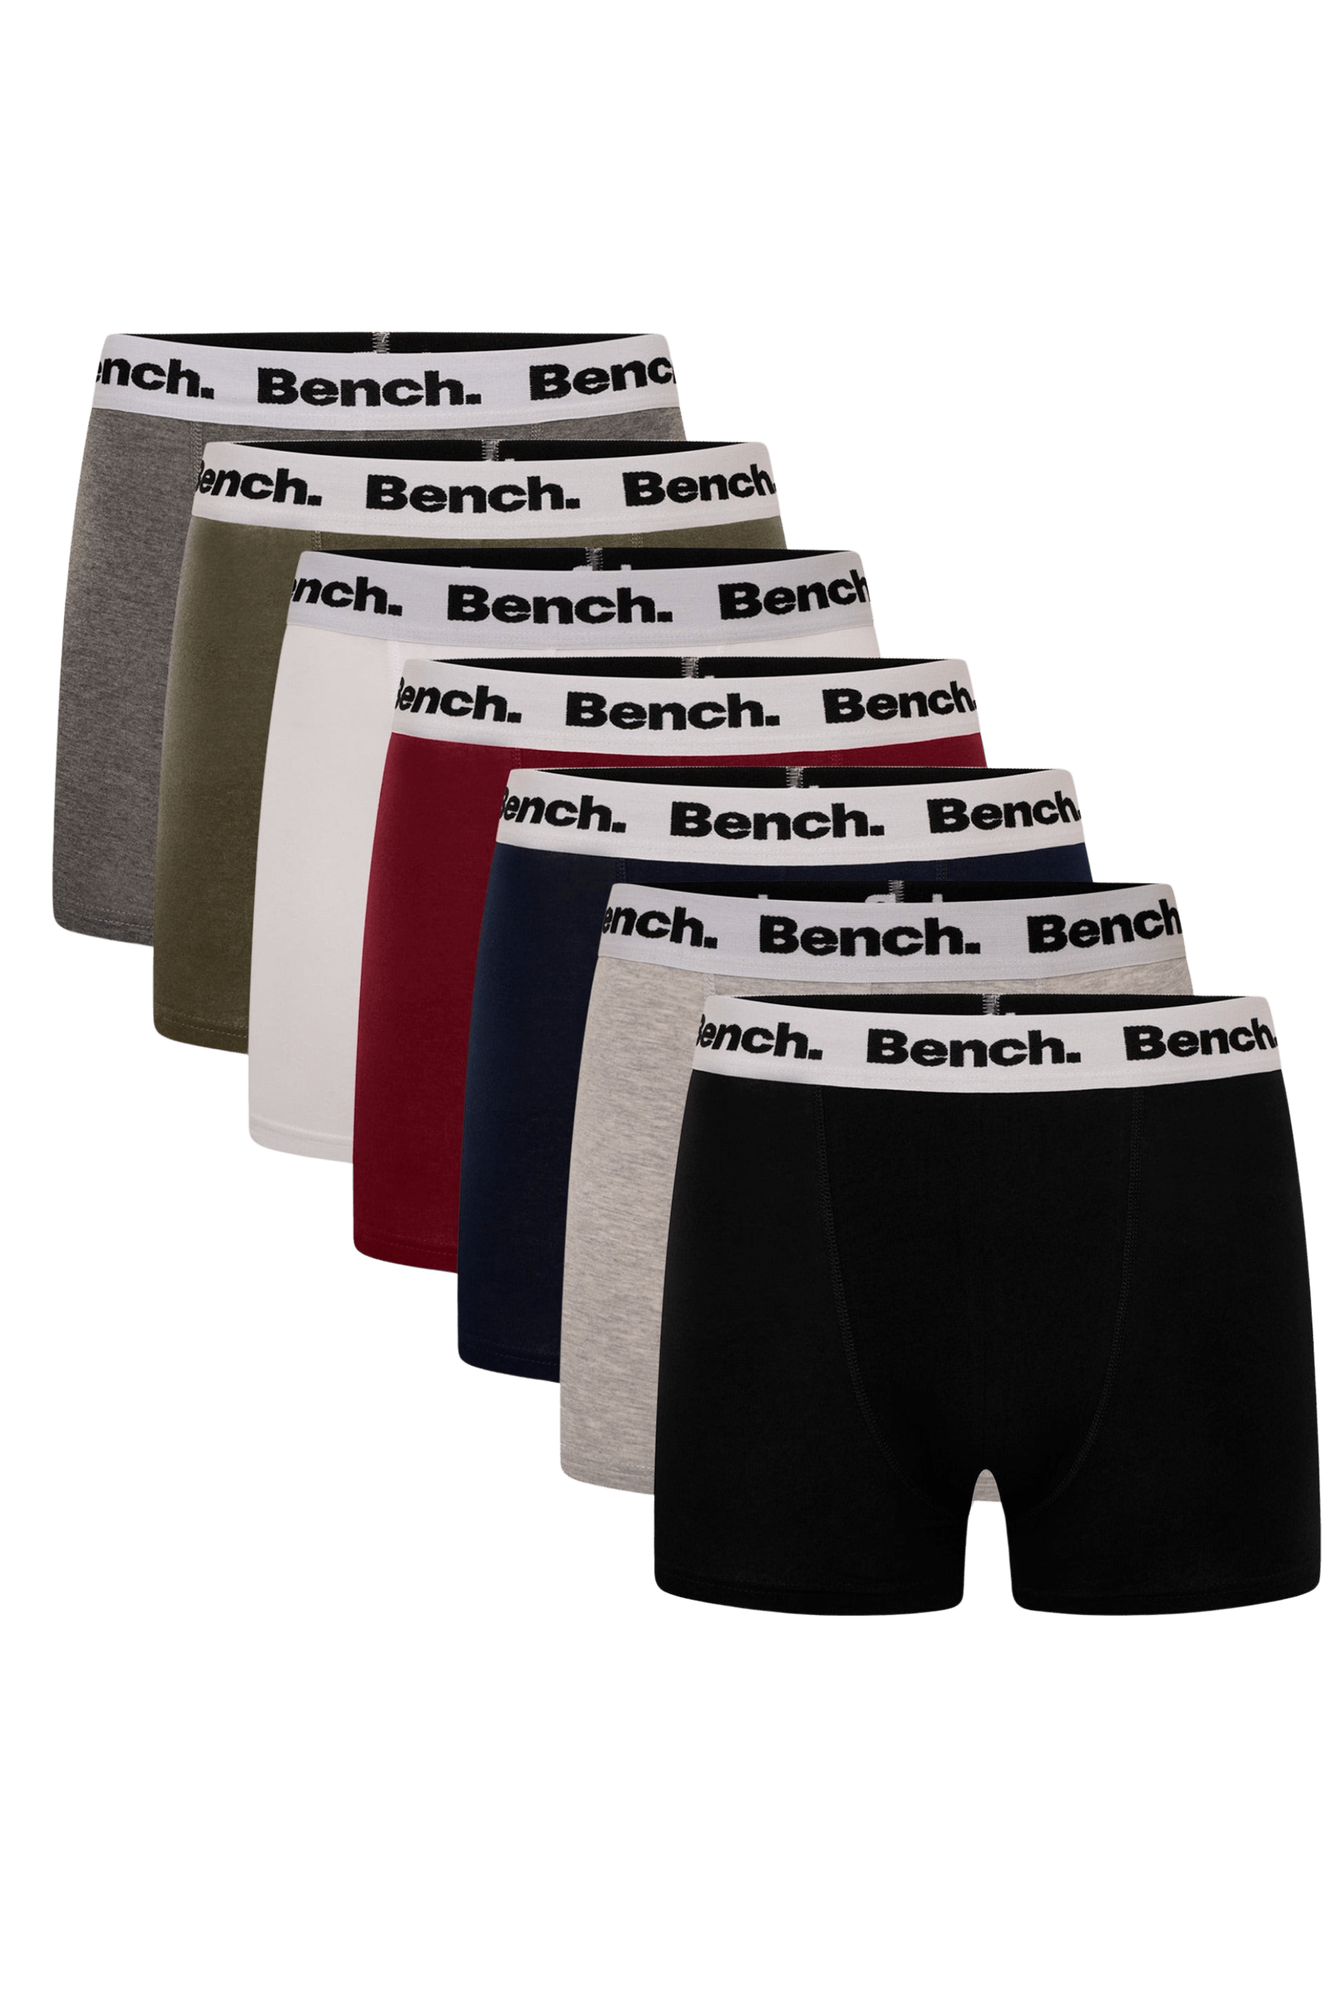 Bench Mens Boxer Shorts / Trunks - Assorted 6 Pack - All Sizes - Great  Value 